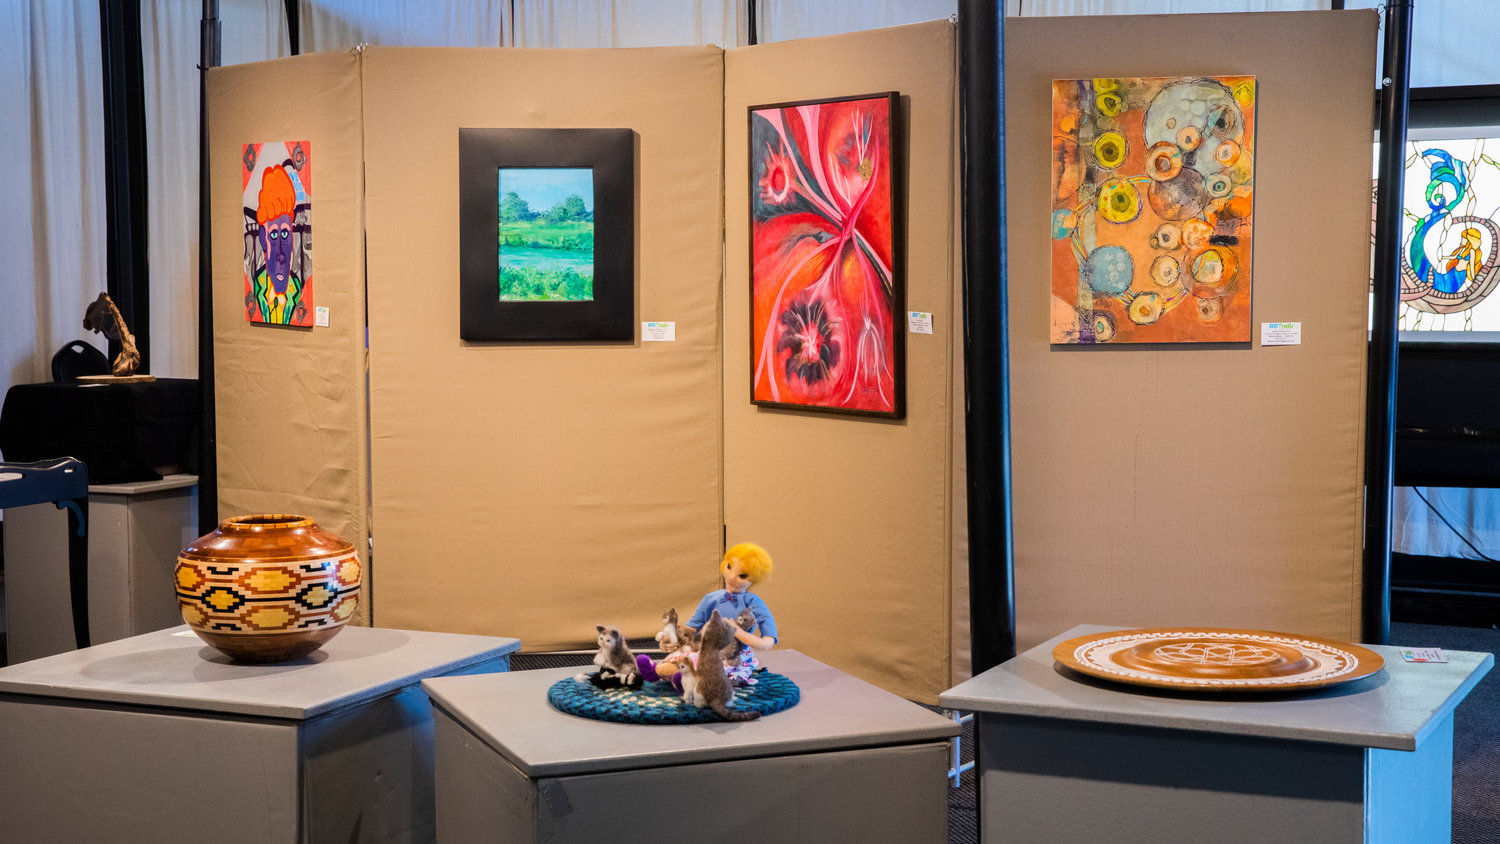 Creative pieces from various artists are displayed inside an ARTrails Gallery at the Centralia Train Station on Tuesday.